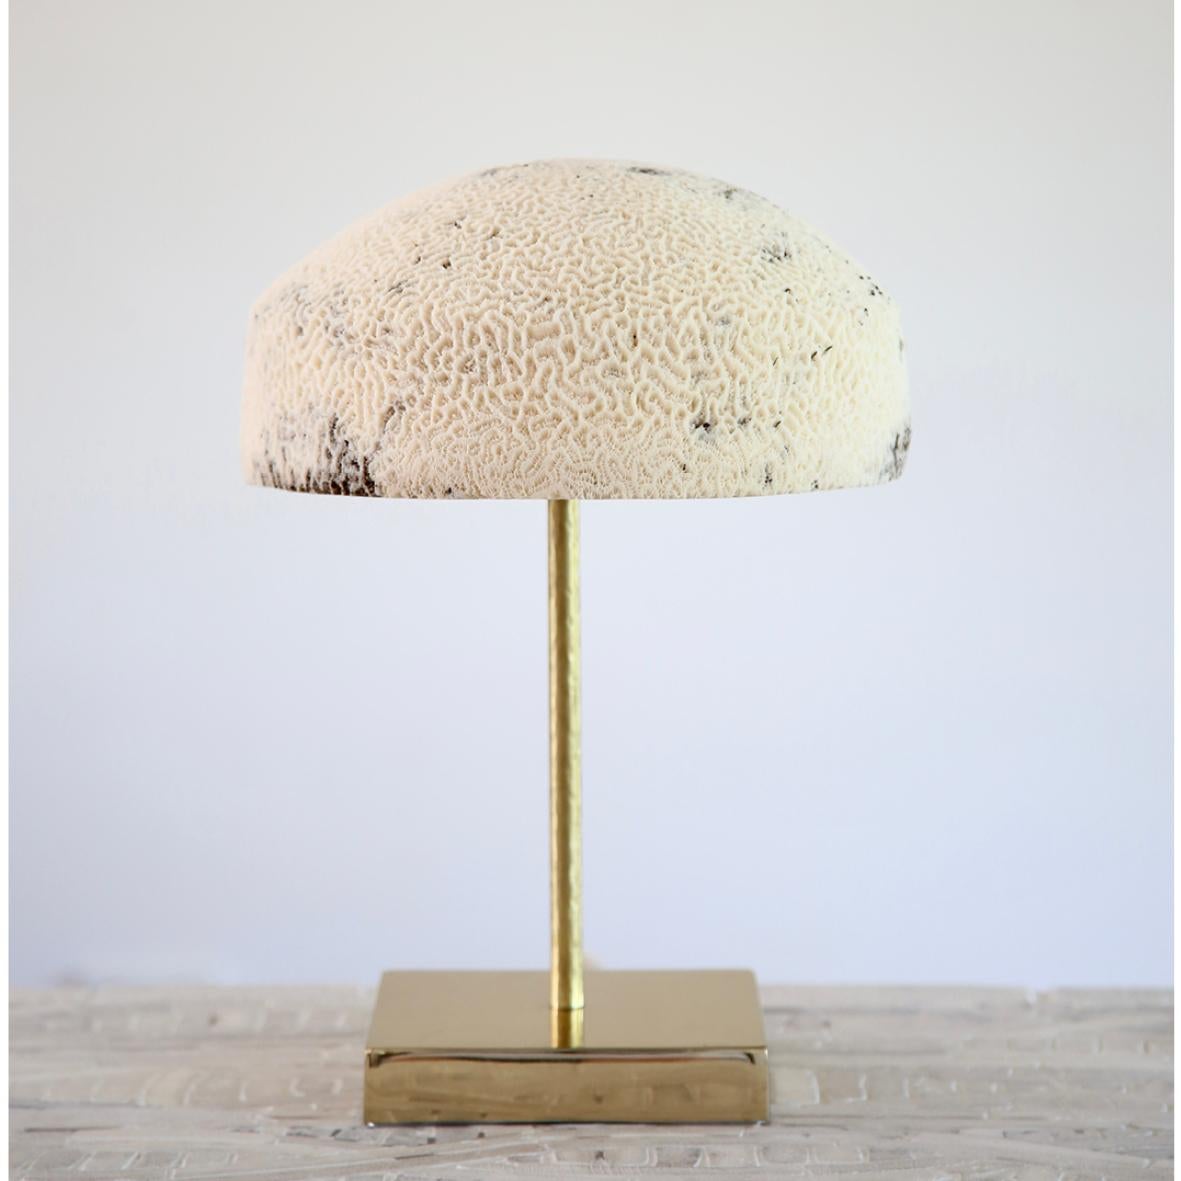 Fossil Coral Lamp - Dome - Handgefertigtes Ethical Chic Relikt (Salomon-Inseln) im Angebot